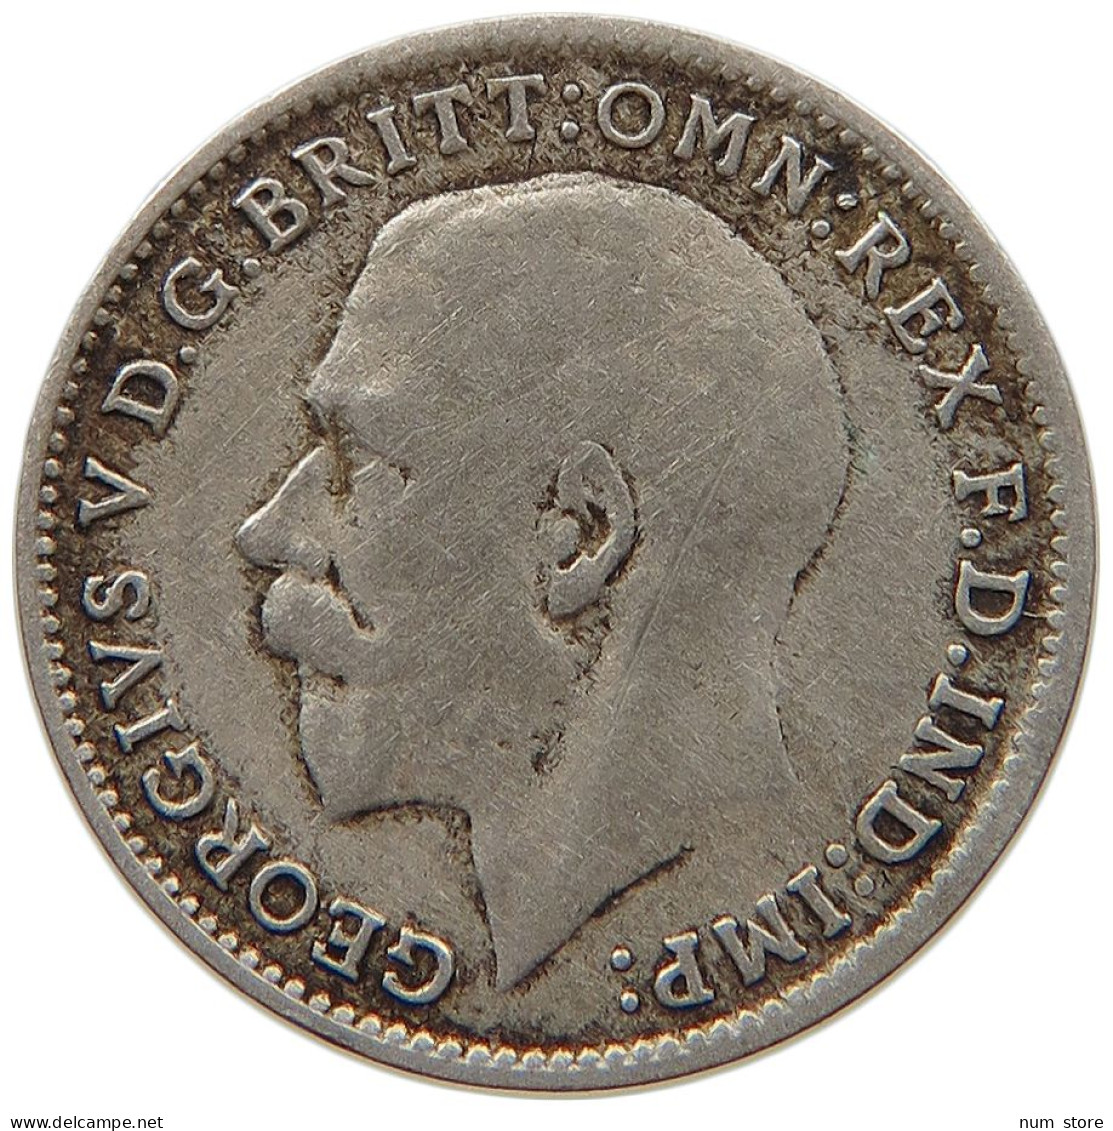 GREAT BRITAIN THREEPENCE 1920 George V. (1910-1936) #s017 0119 - F. 3 Pence